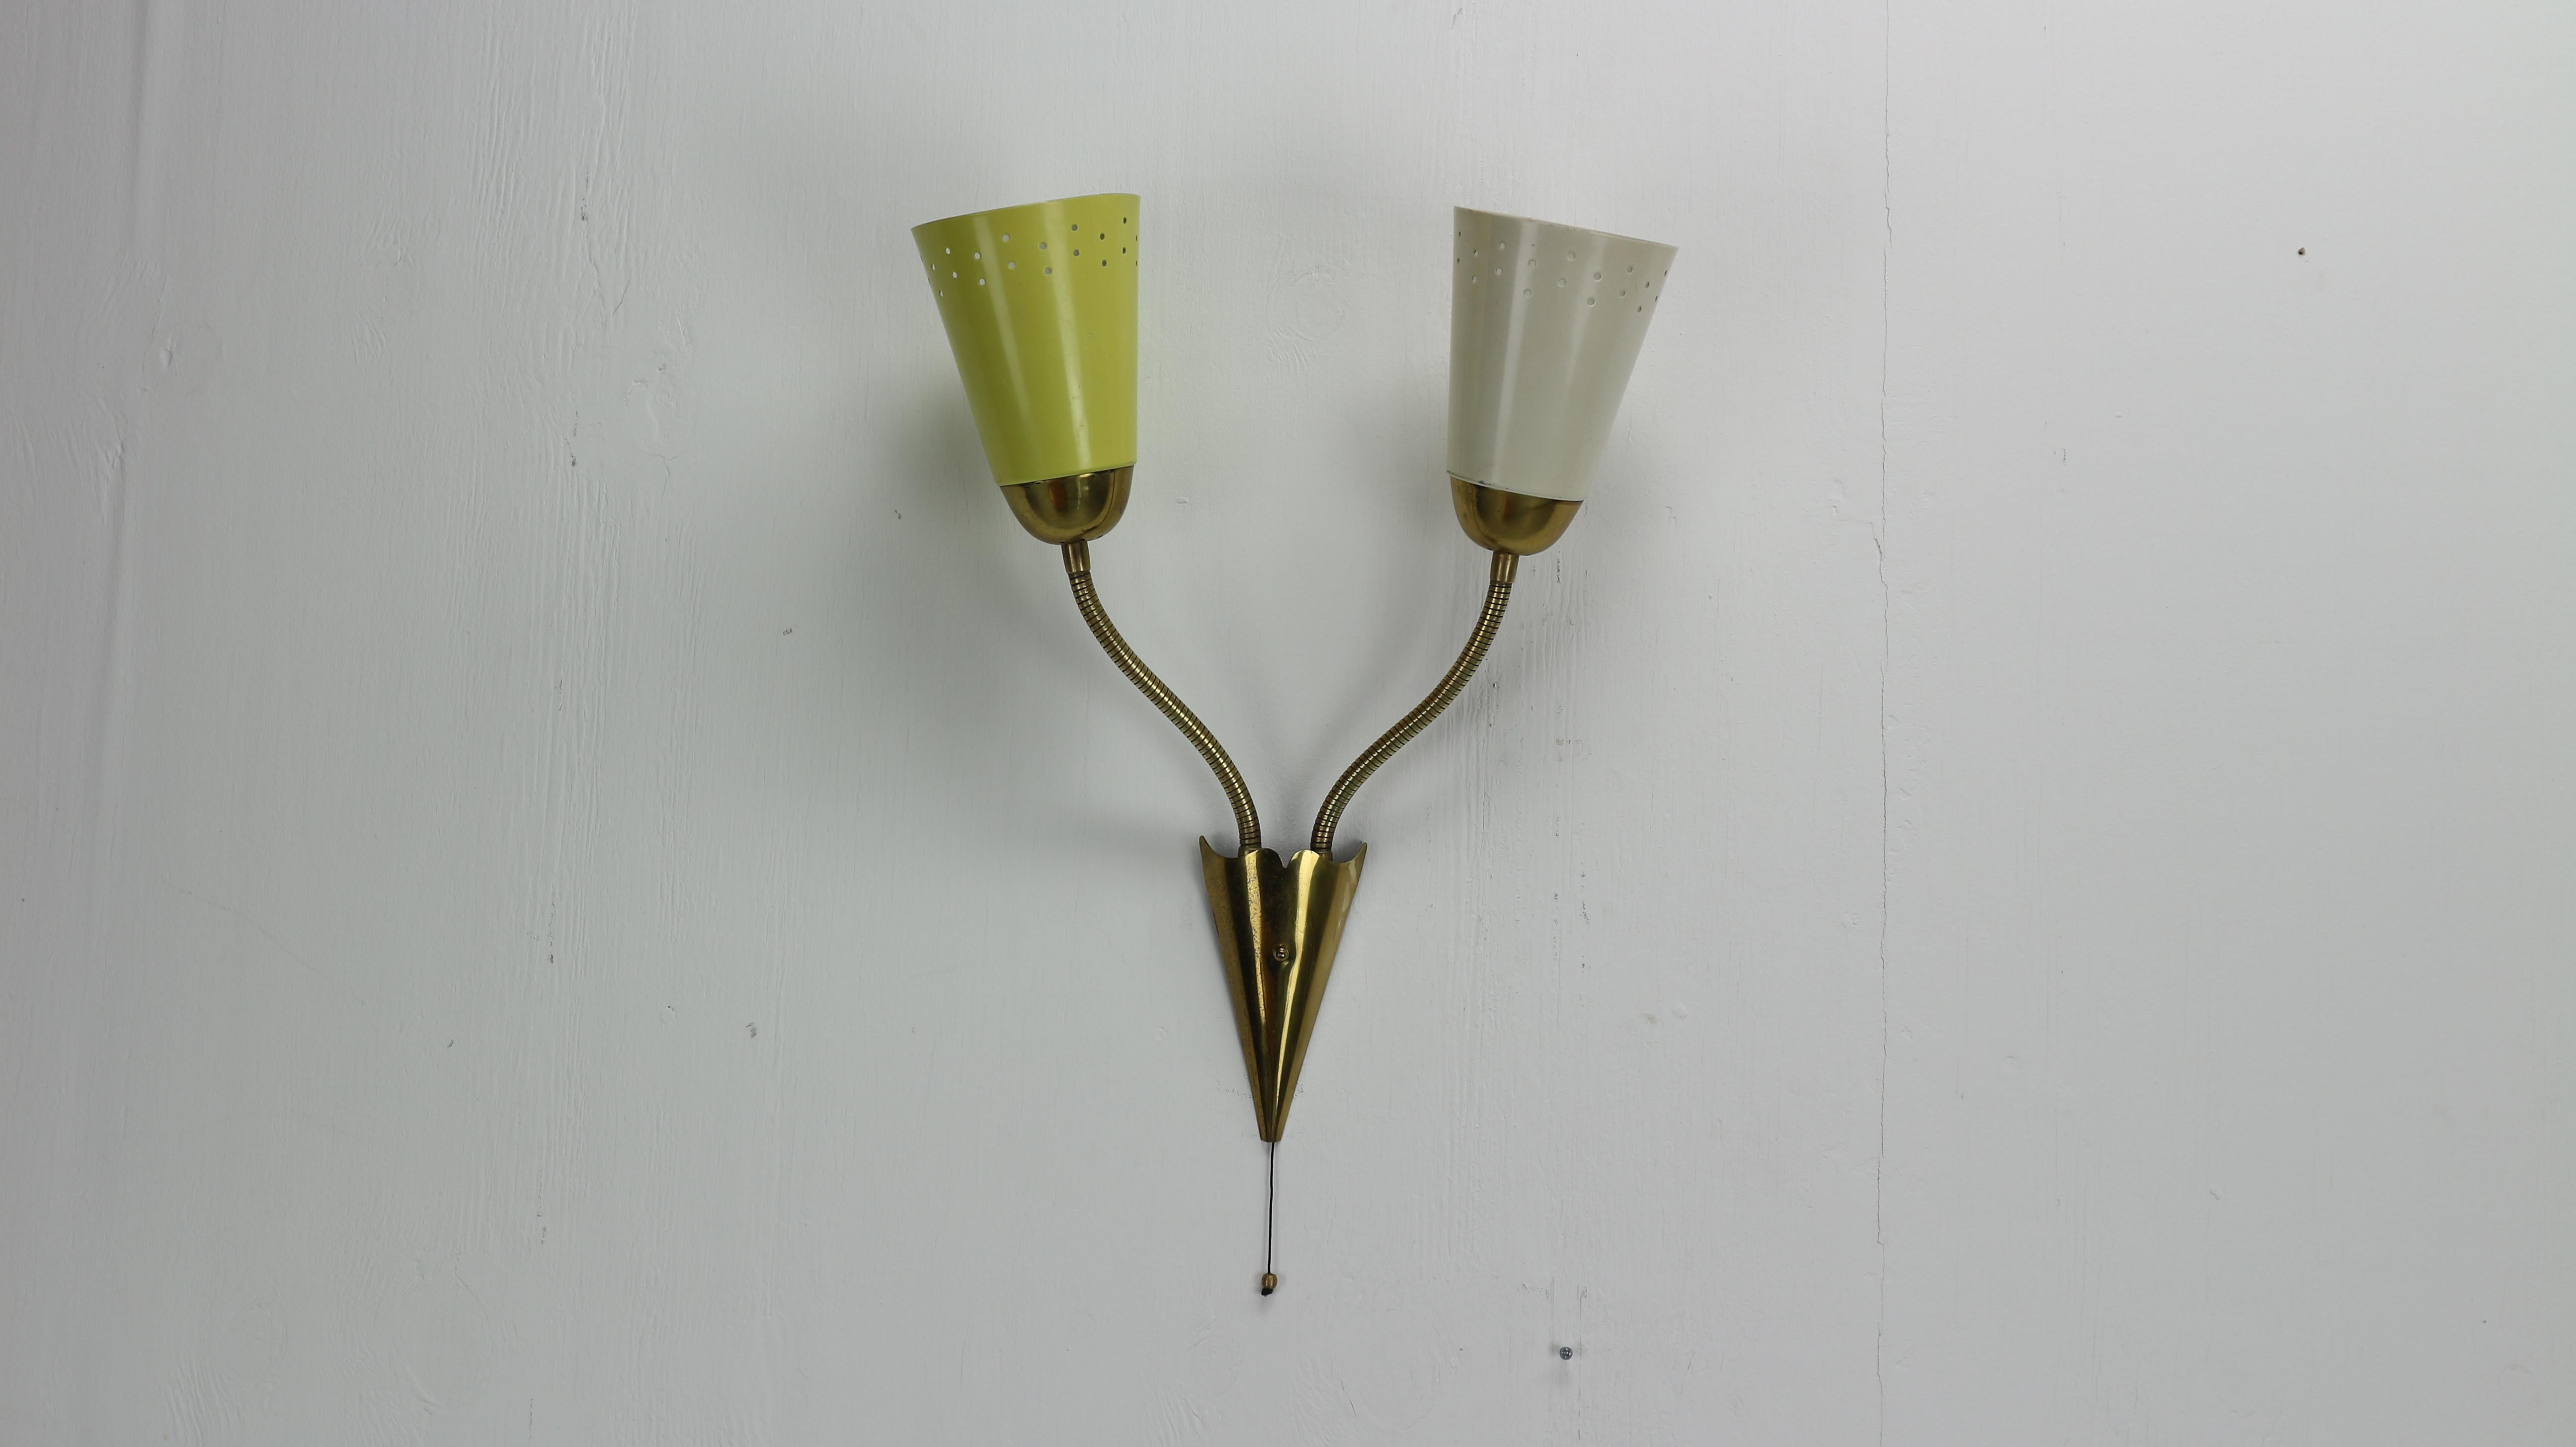 This two sconces hanging wall lamp is made from brass and perforated metal. The vintage design accent of Mid-Century Modern period.
You can rotate and adjust the lamp shades in any position to direct or not direct lightening.
Produced in the